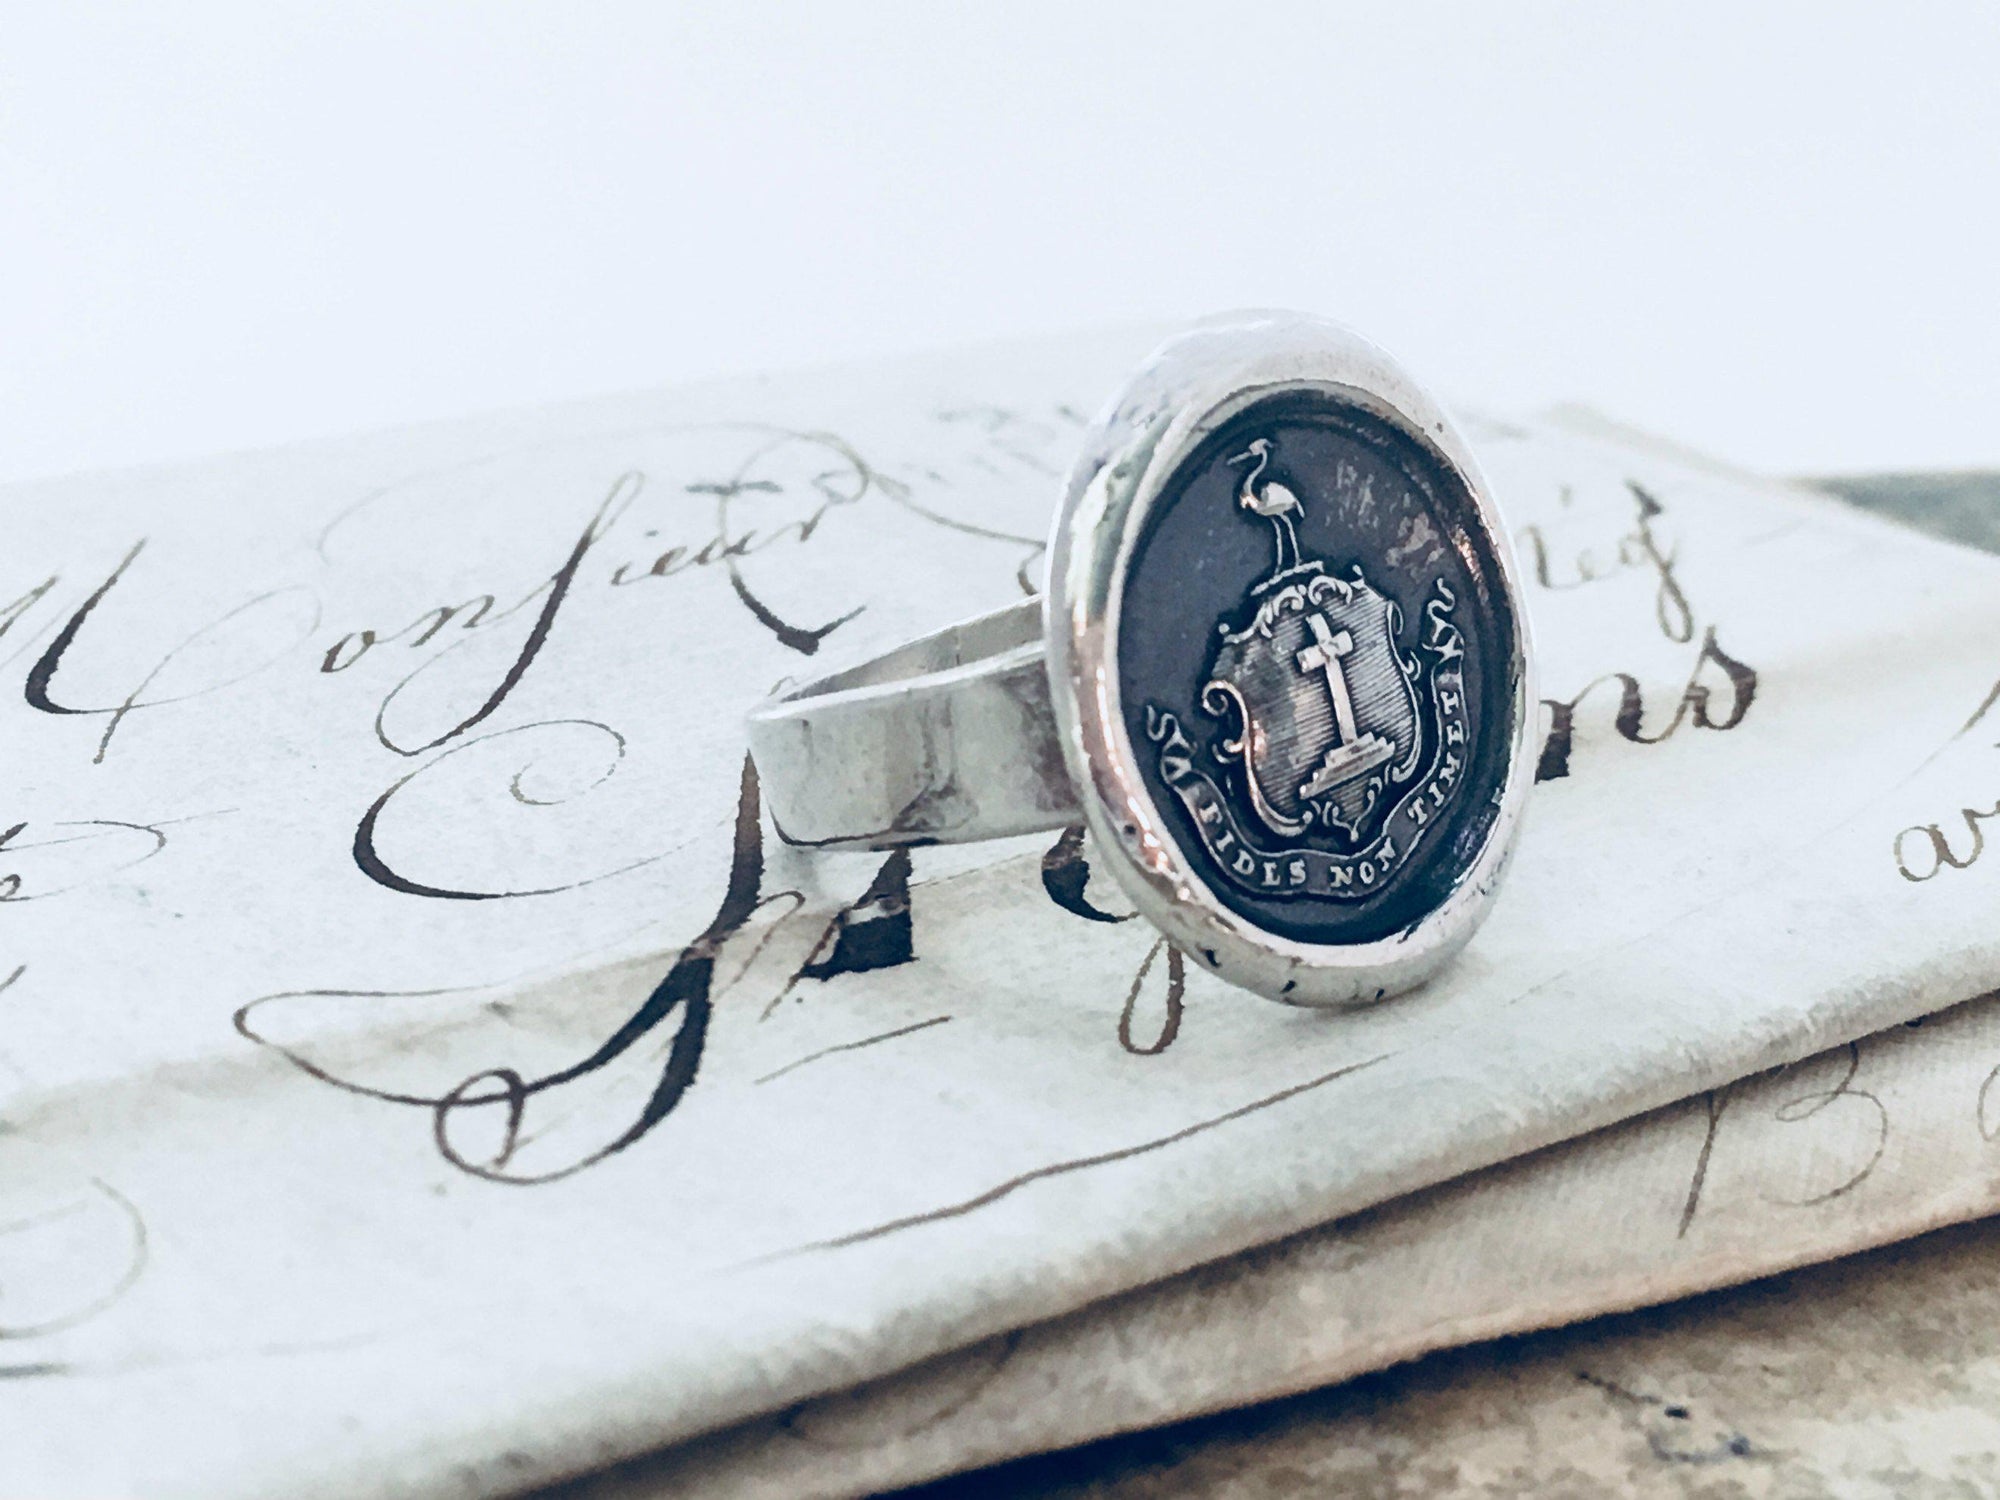 Faith wax seal ring in front of a pen